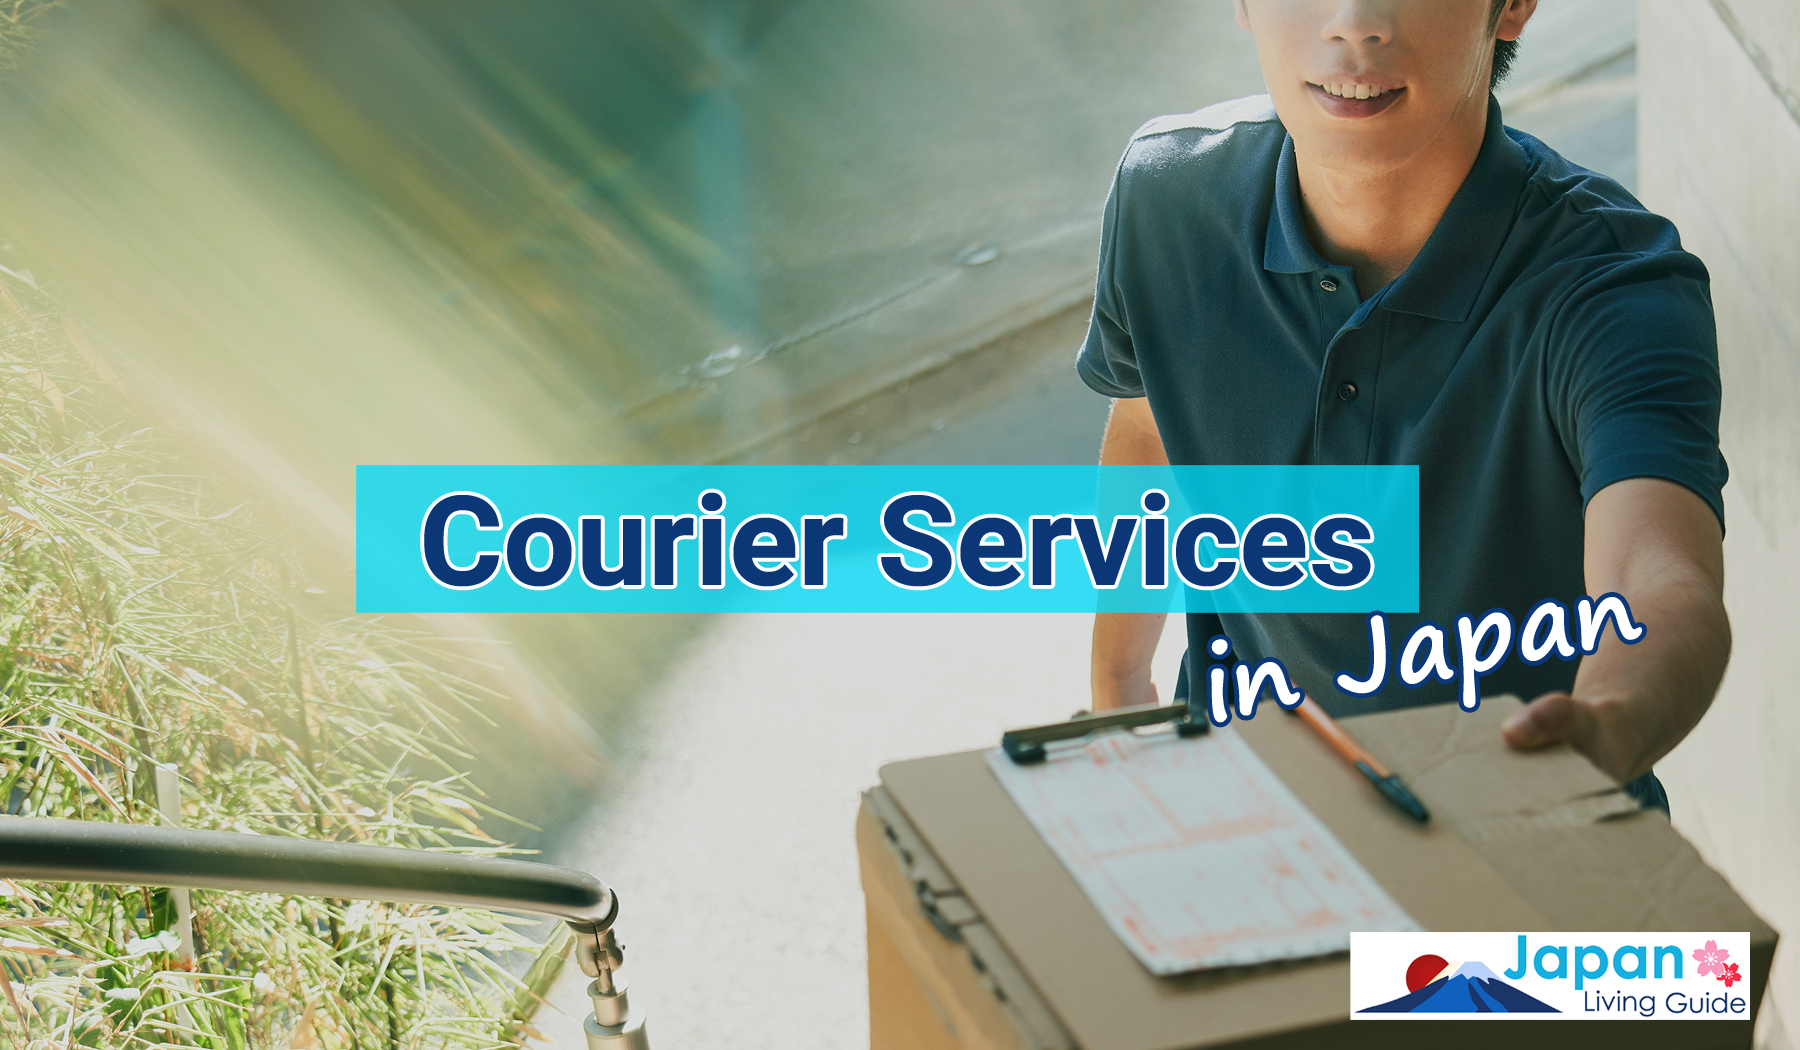 Japan Courier Services Combine Convenience, Efficiency and